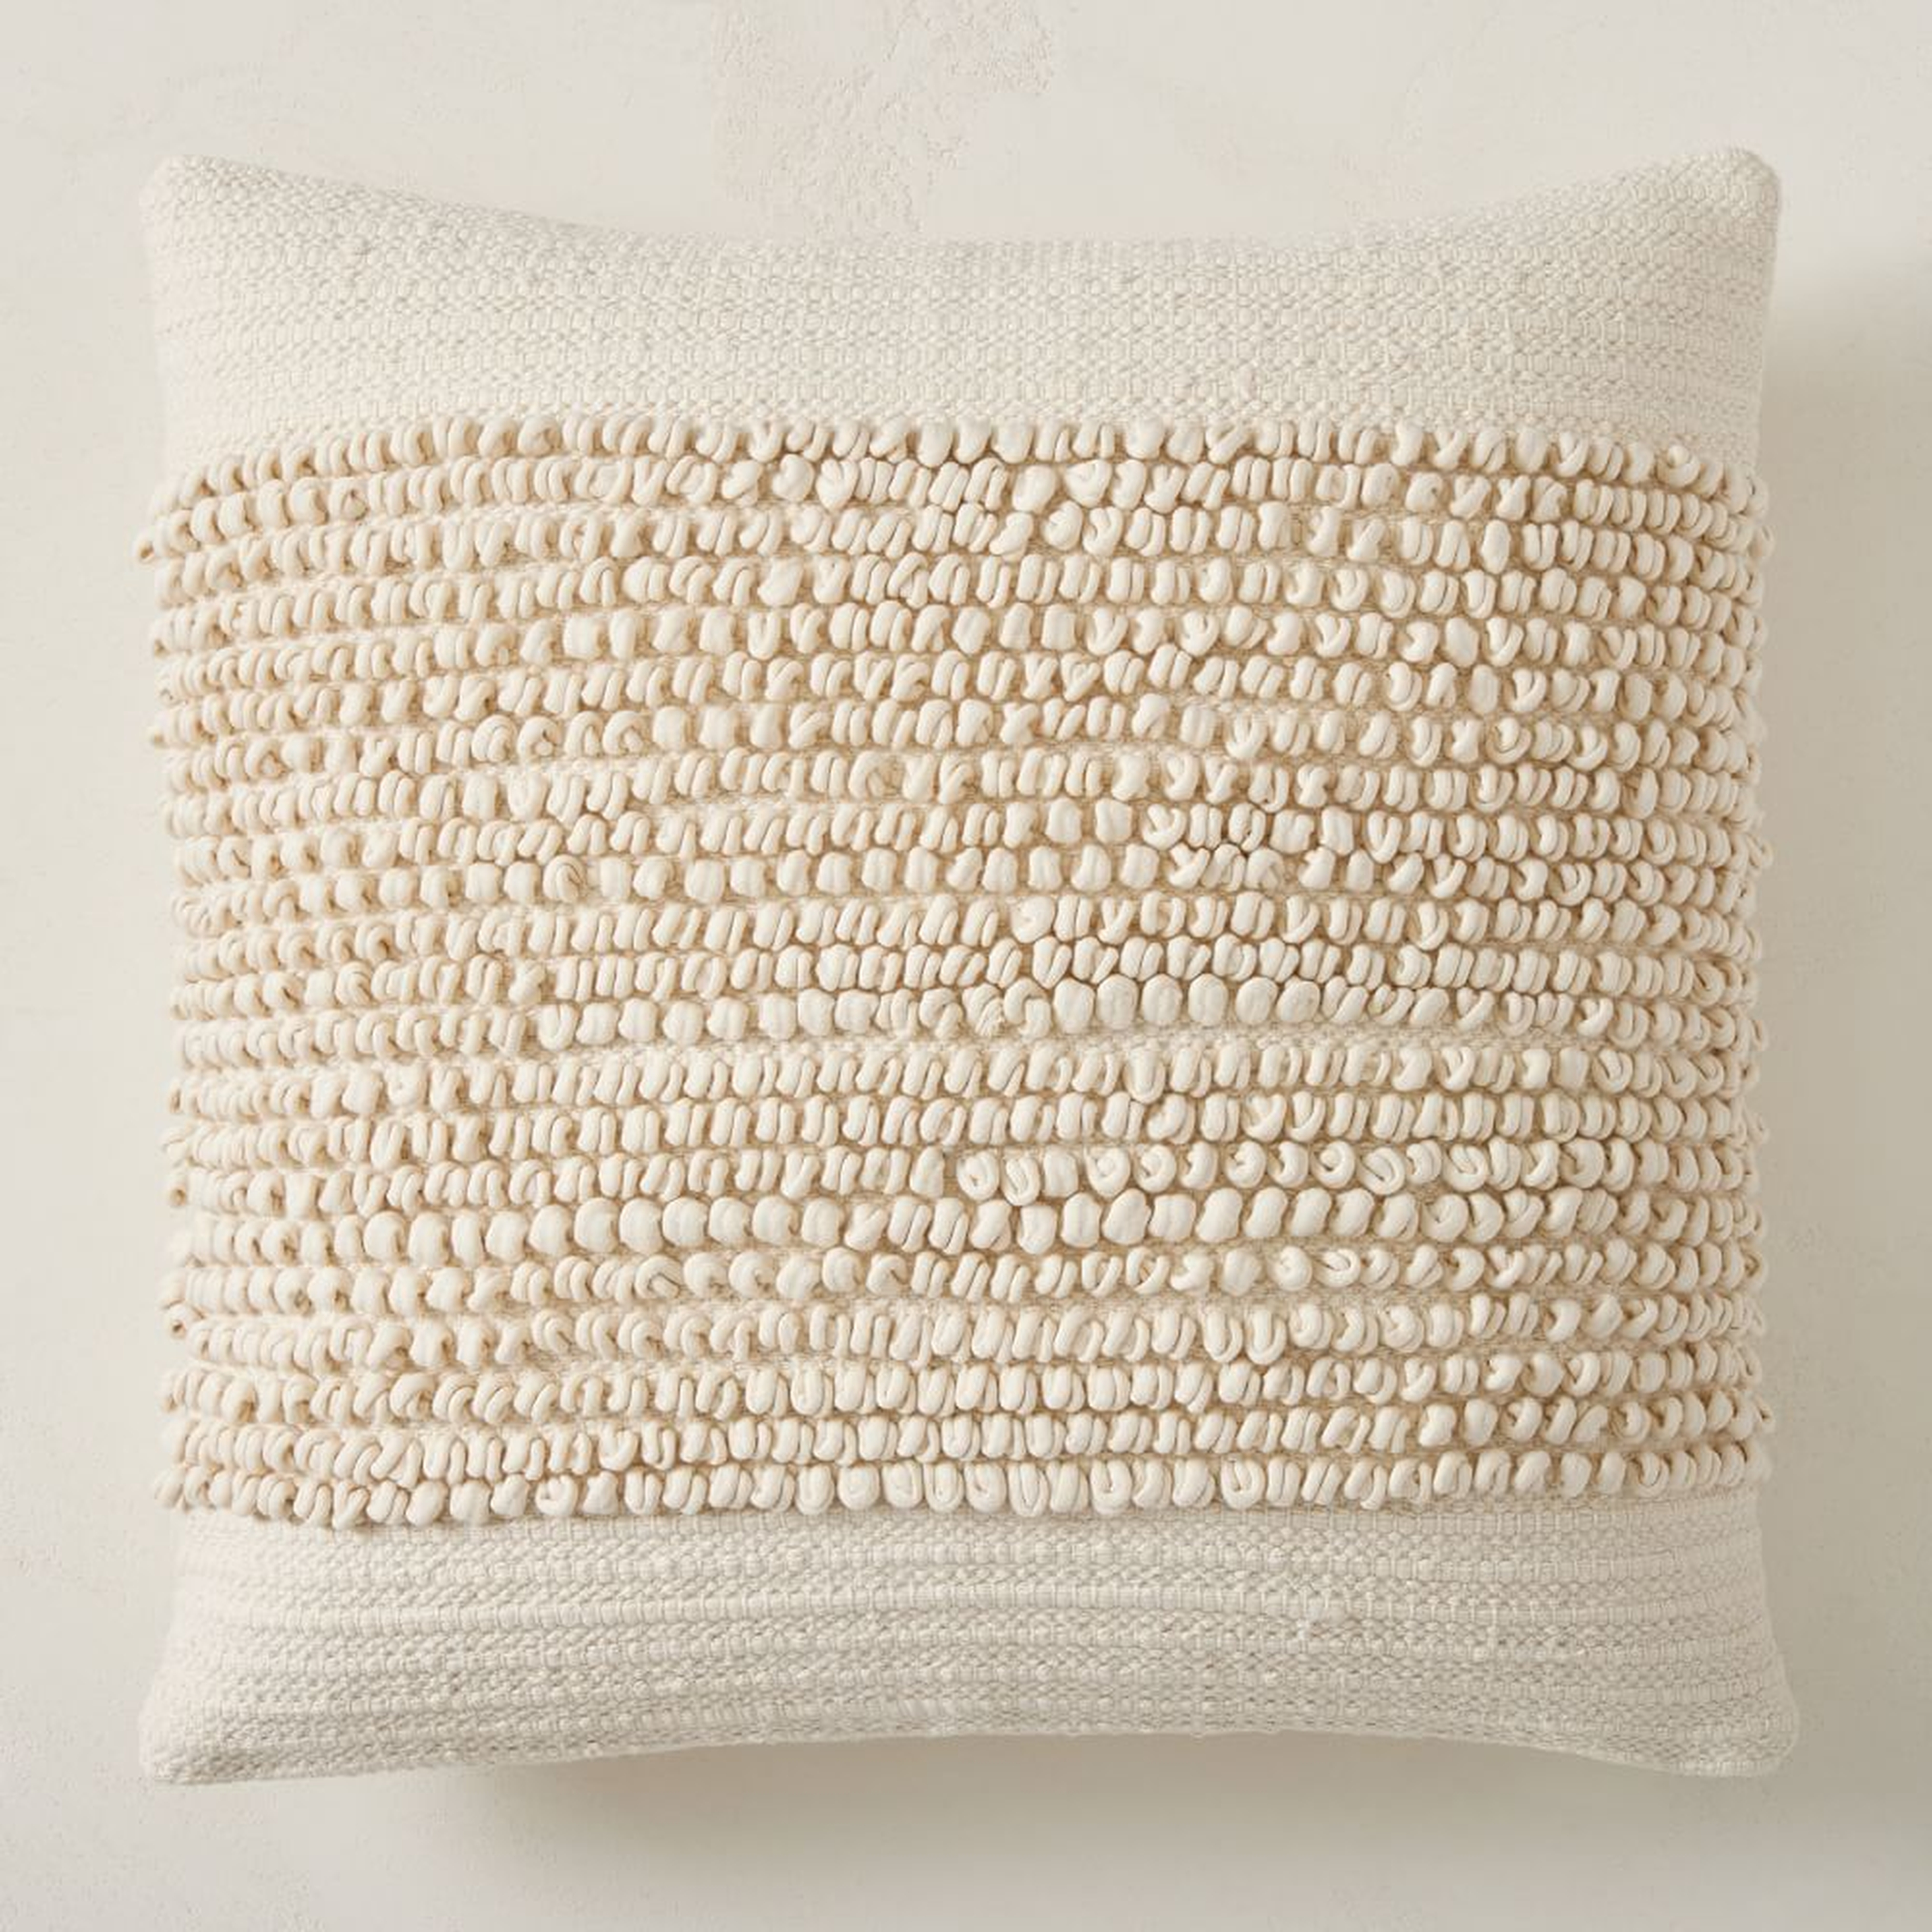 Soft Corded Banded Pillow Cover, 20"x20", Natural Canvas - West Elm